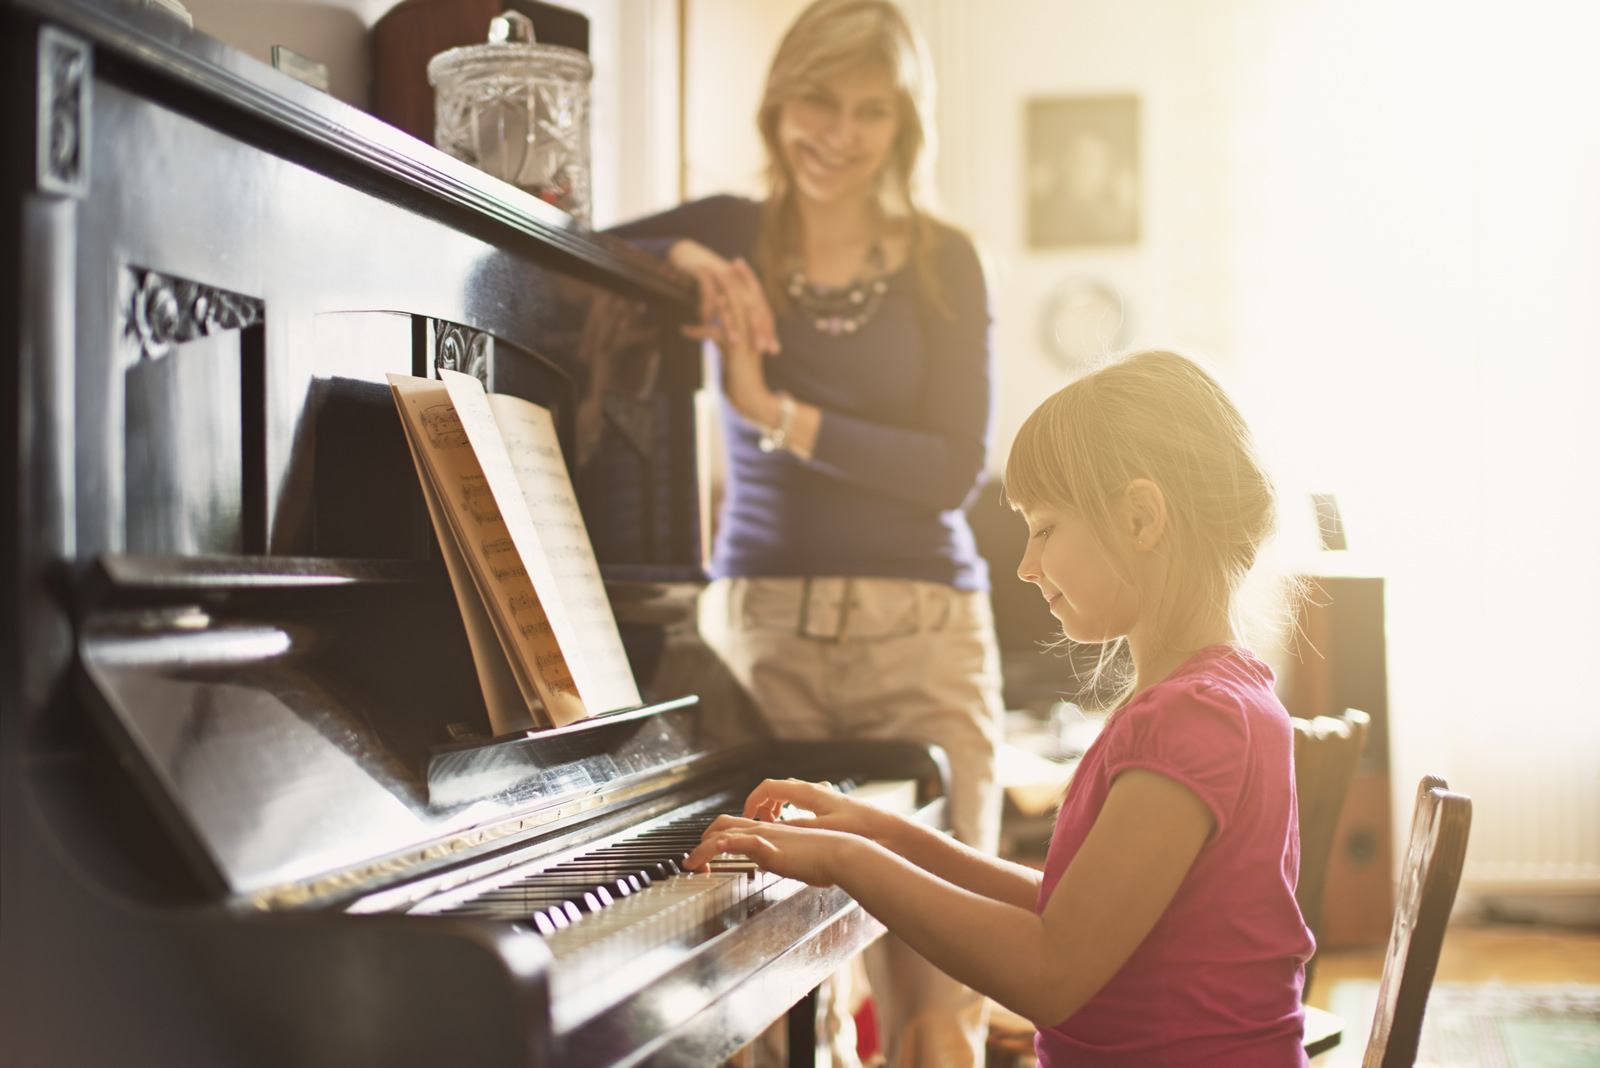 Background image of a young girl playing the piano